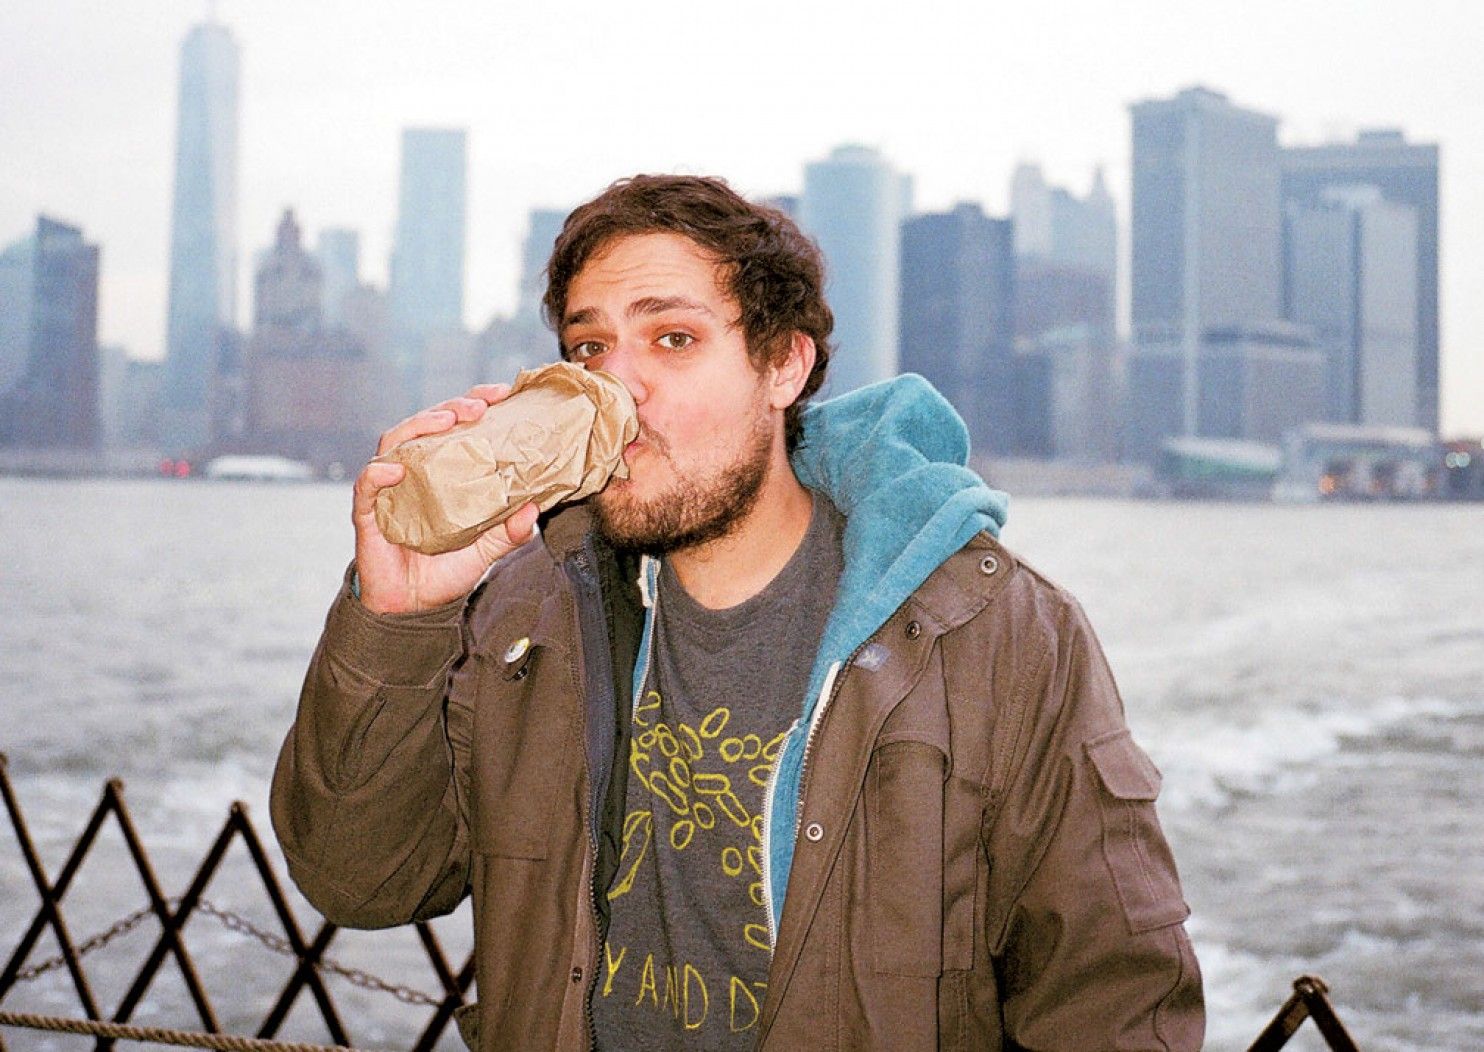 Jeff Rosenstock Announces Co-Headline Tour with Dan Andriano In The Emergency Room